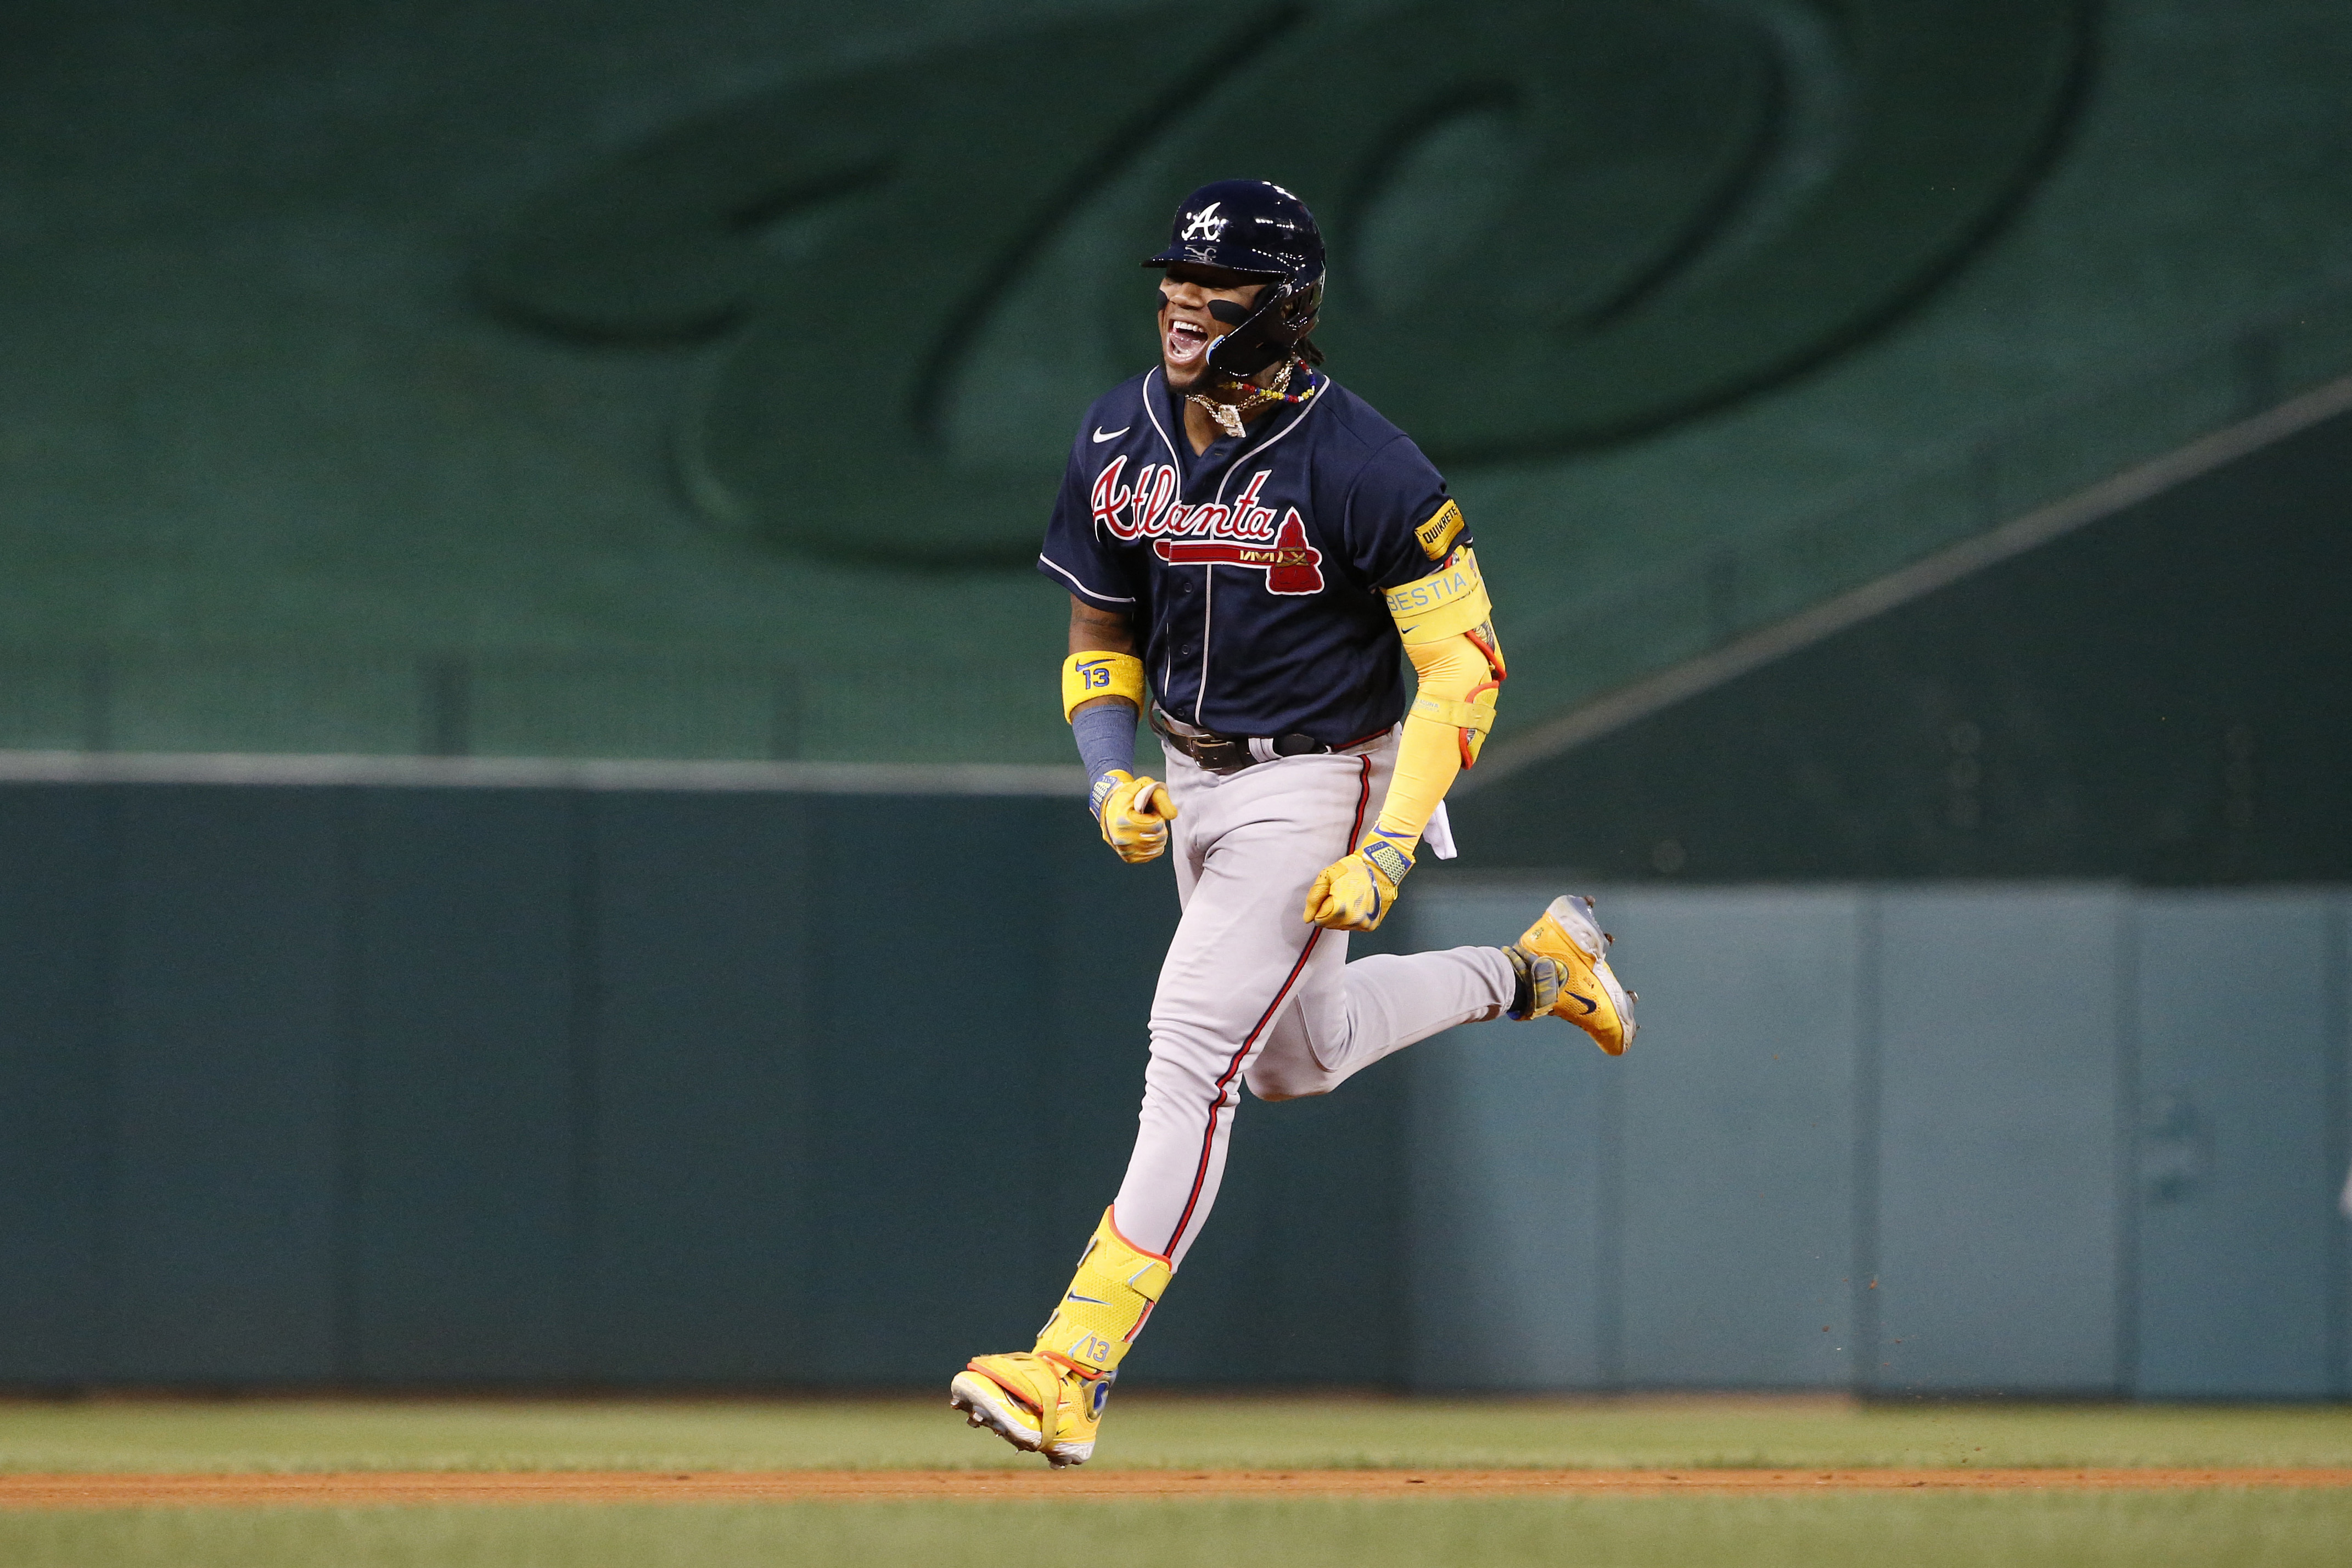 MLB News: Ronald Acuna Jr. admits difficult relationship with